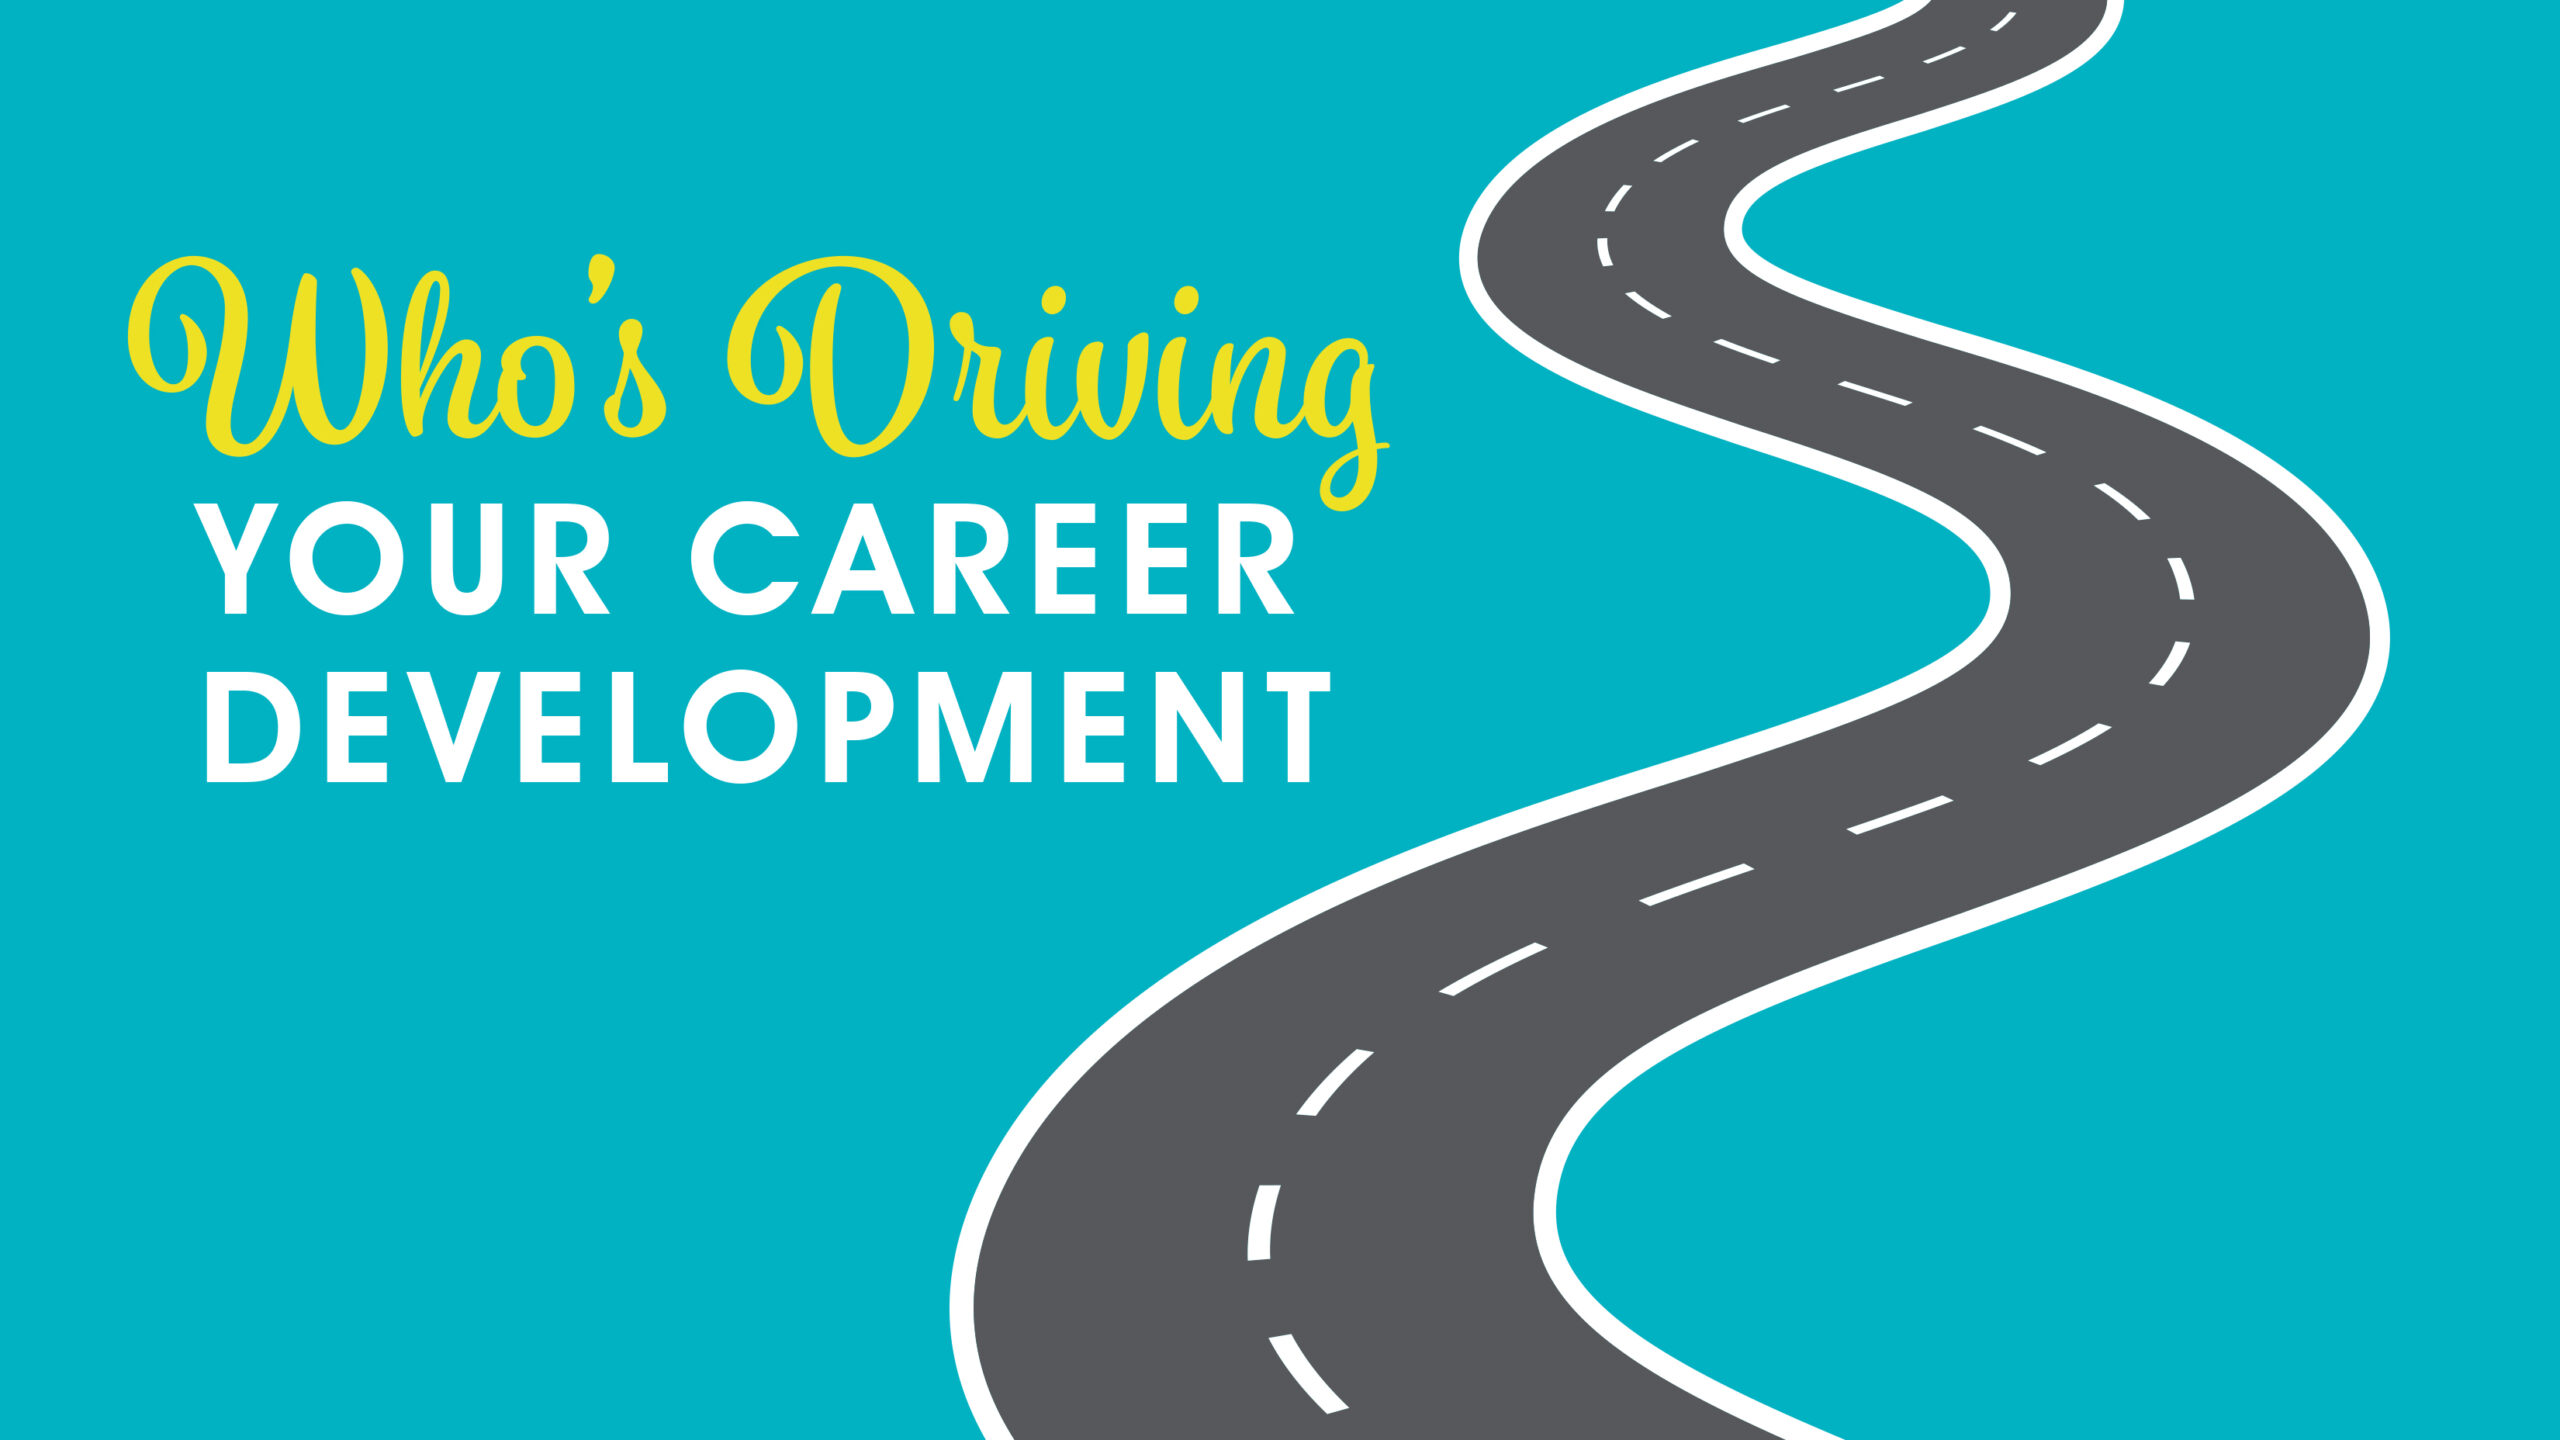 who's driving your career development?